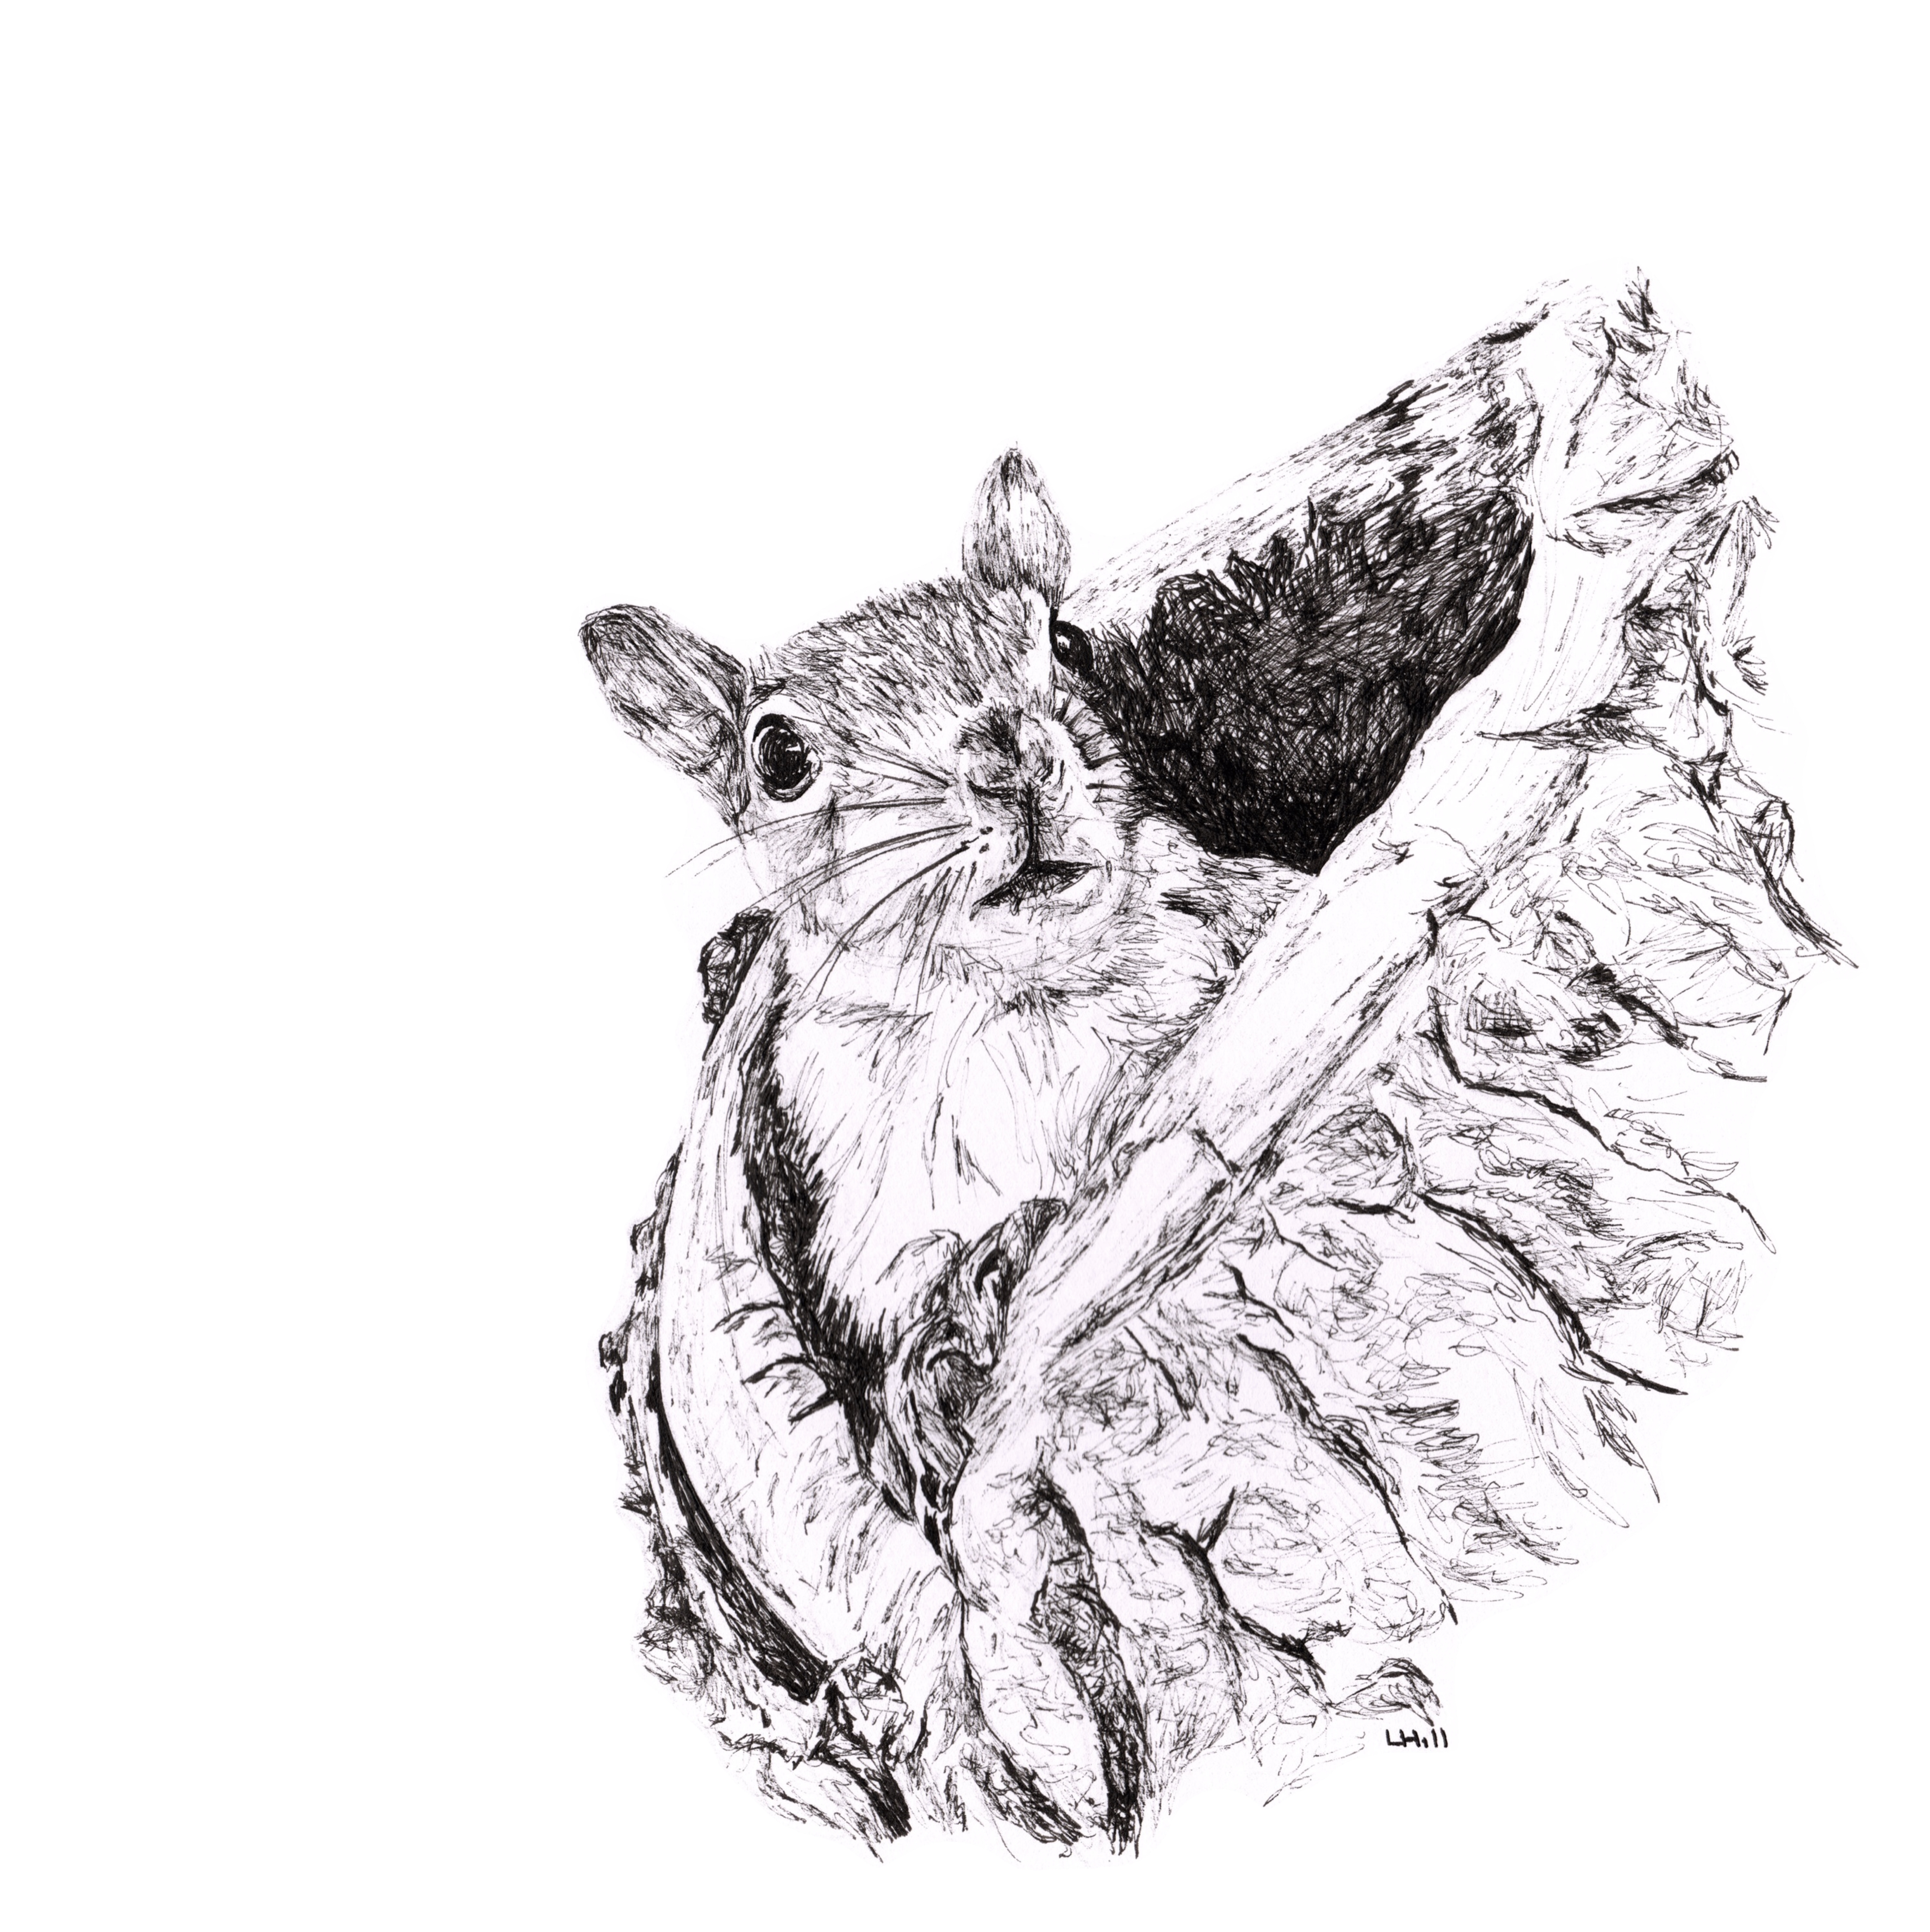 Squirrel in tree trunk pen and ink illustration by Louisa Hill